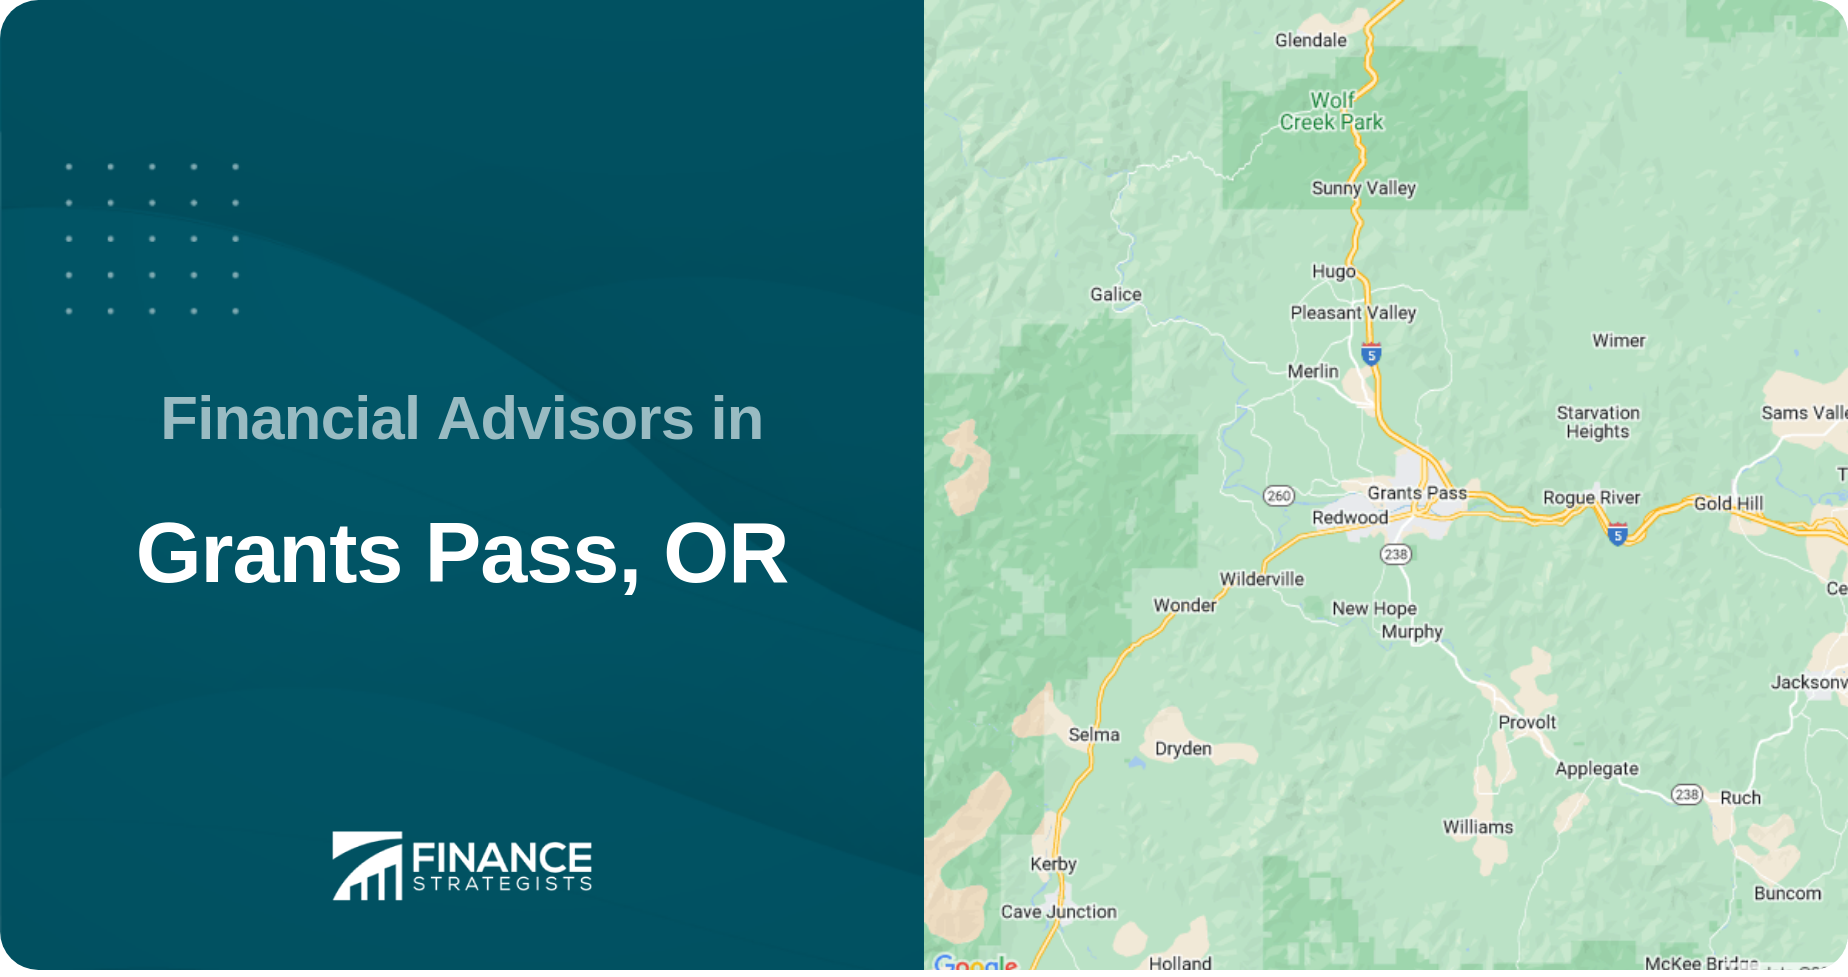 Financial Advisors in Grants Pass, OR